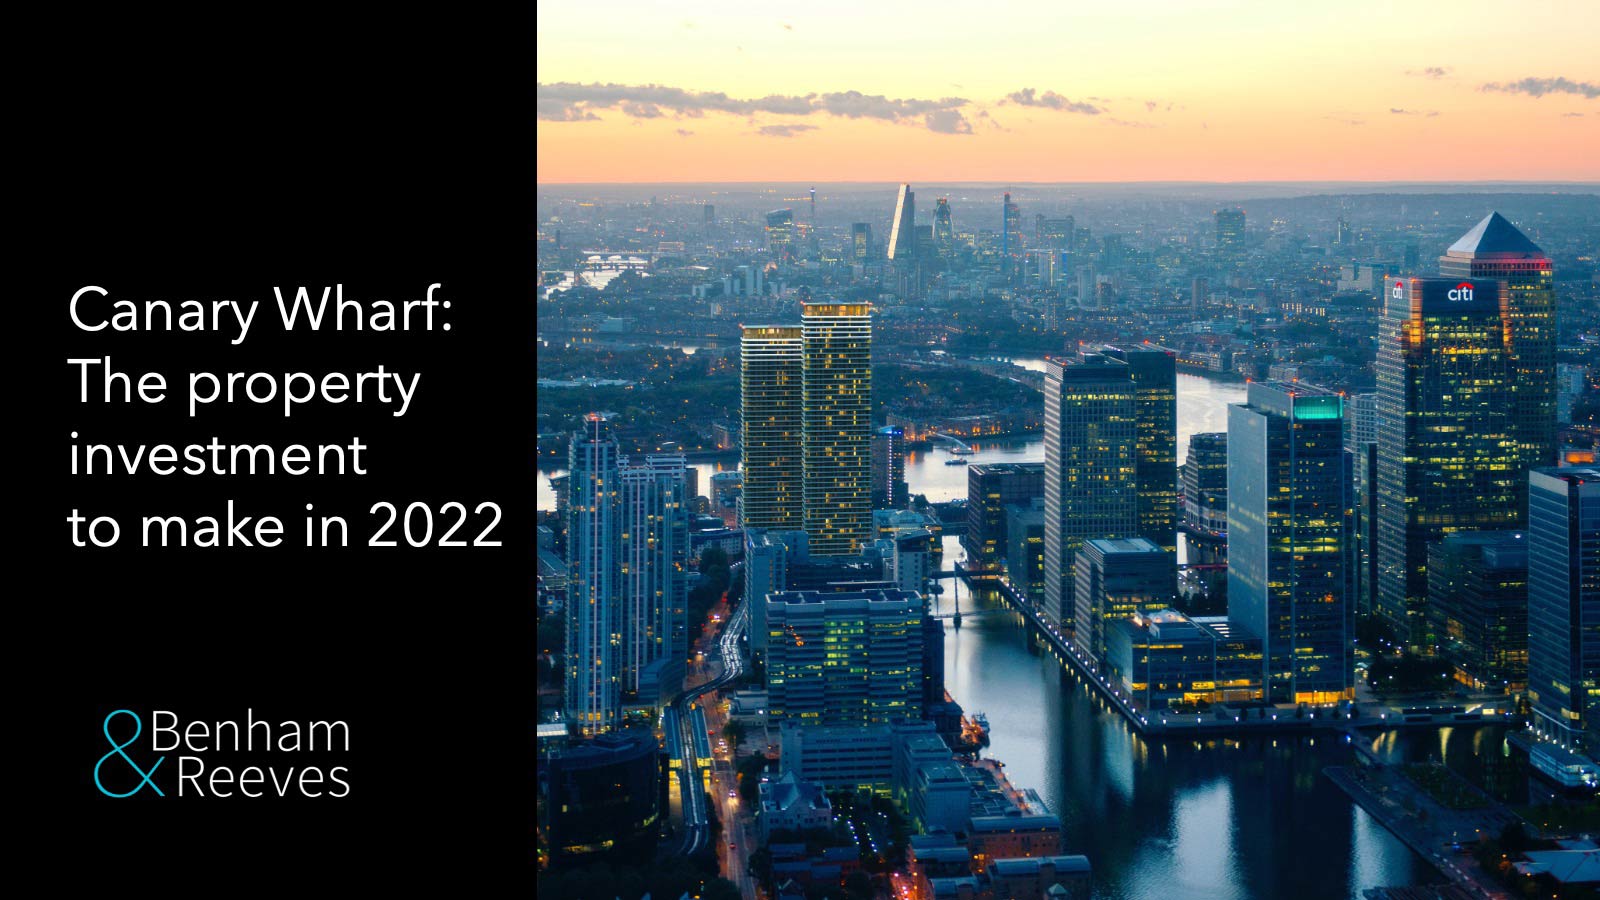 Canary Wharf is a hot property investment for 2022